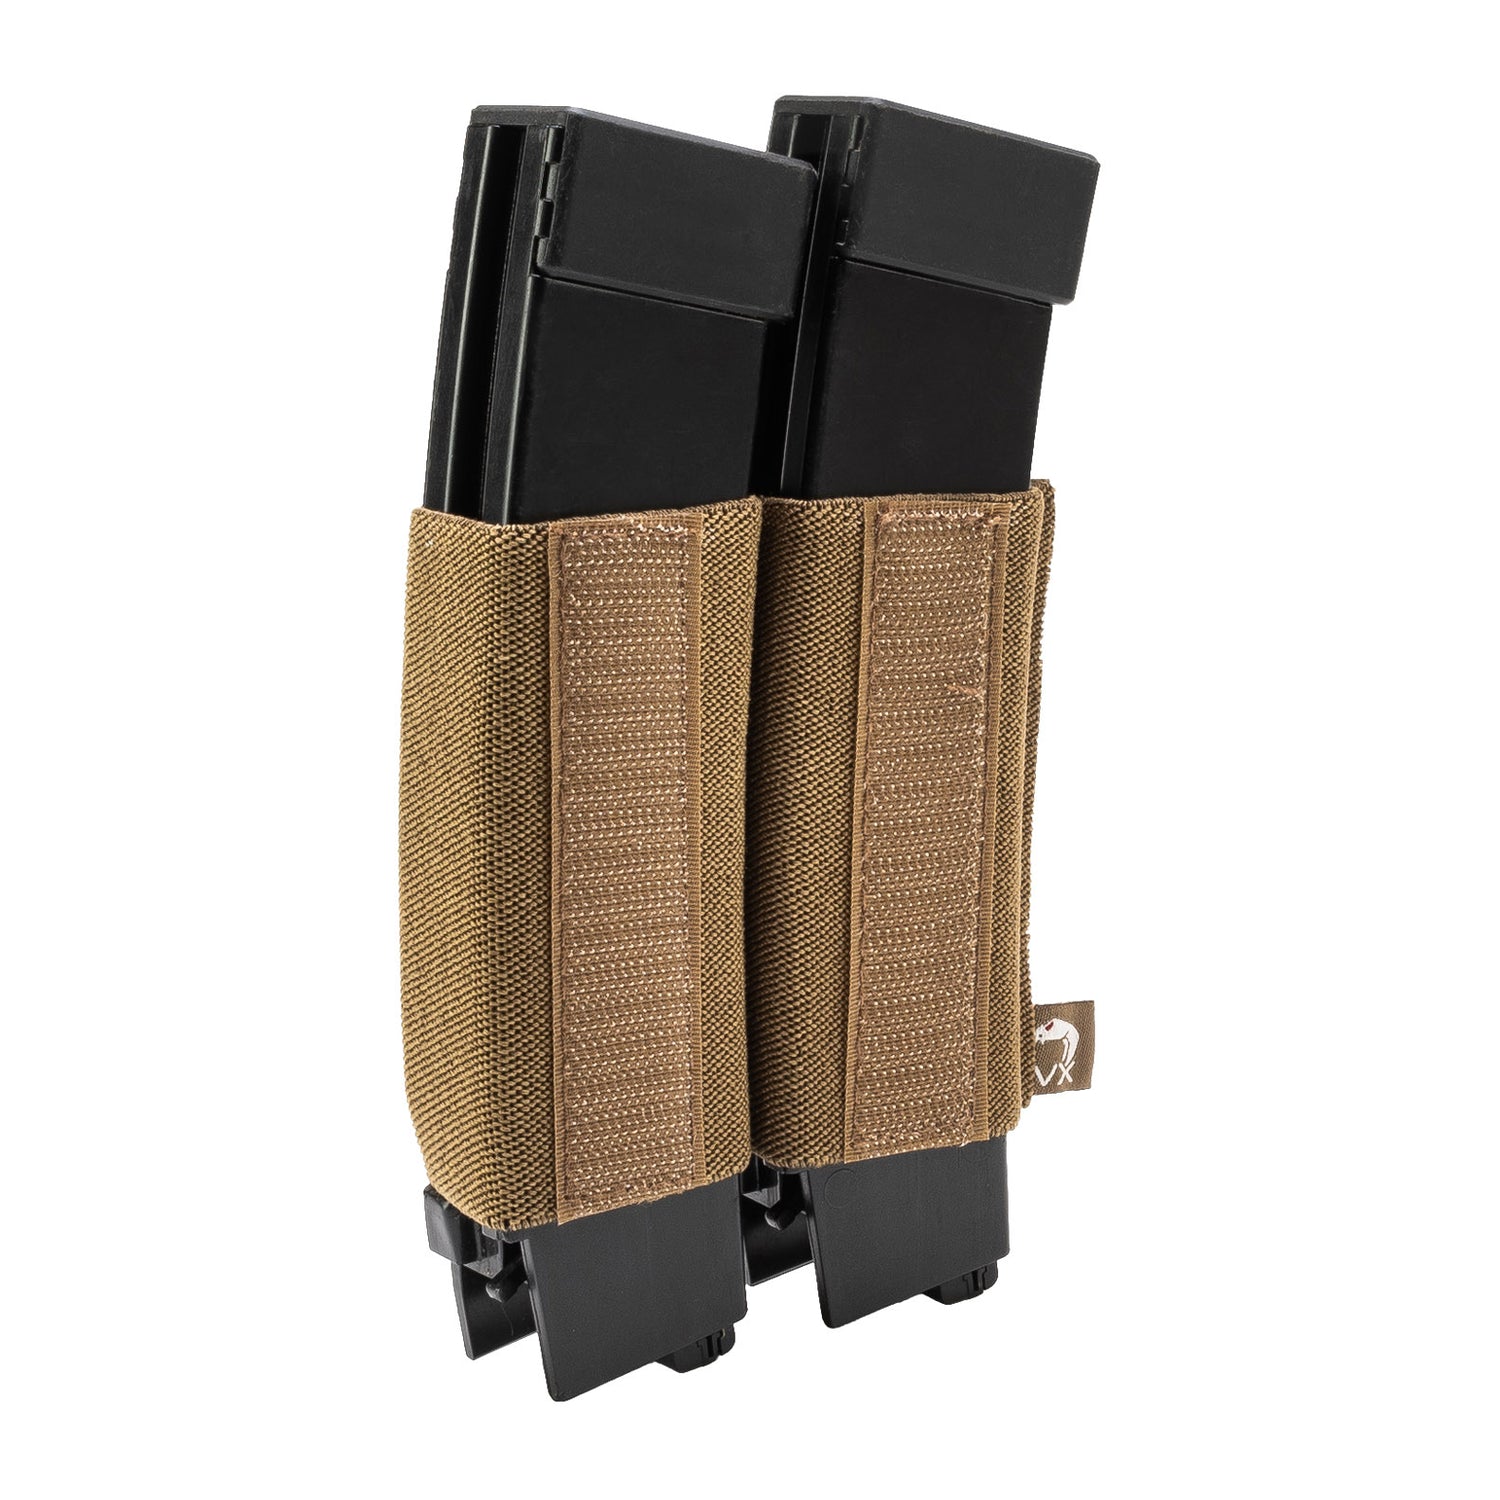 Viper-VX-Double-SMG-Mag-Sleeve